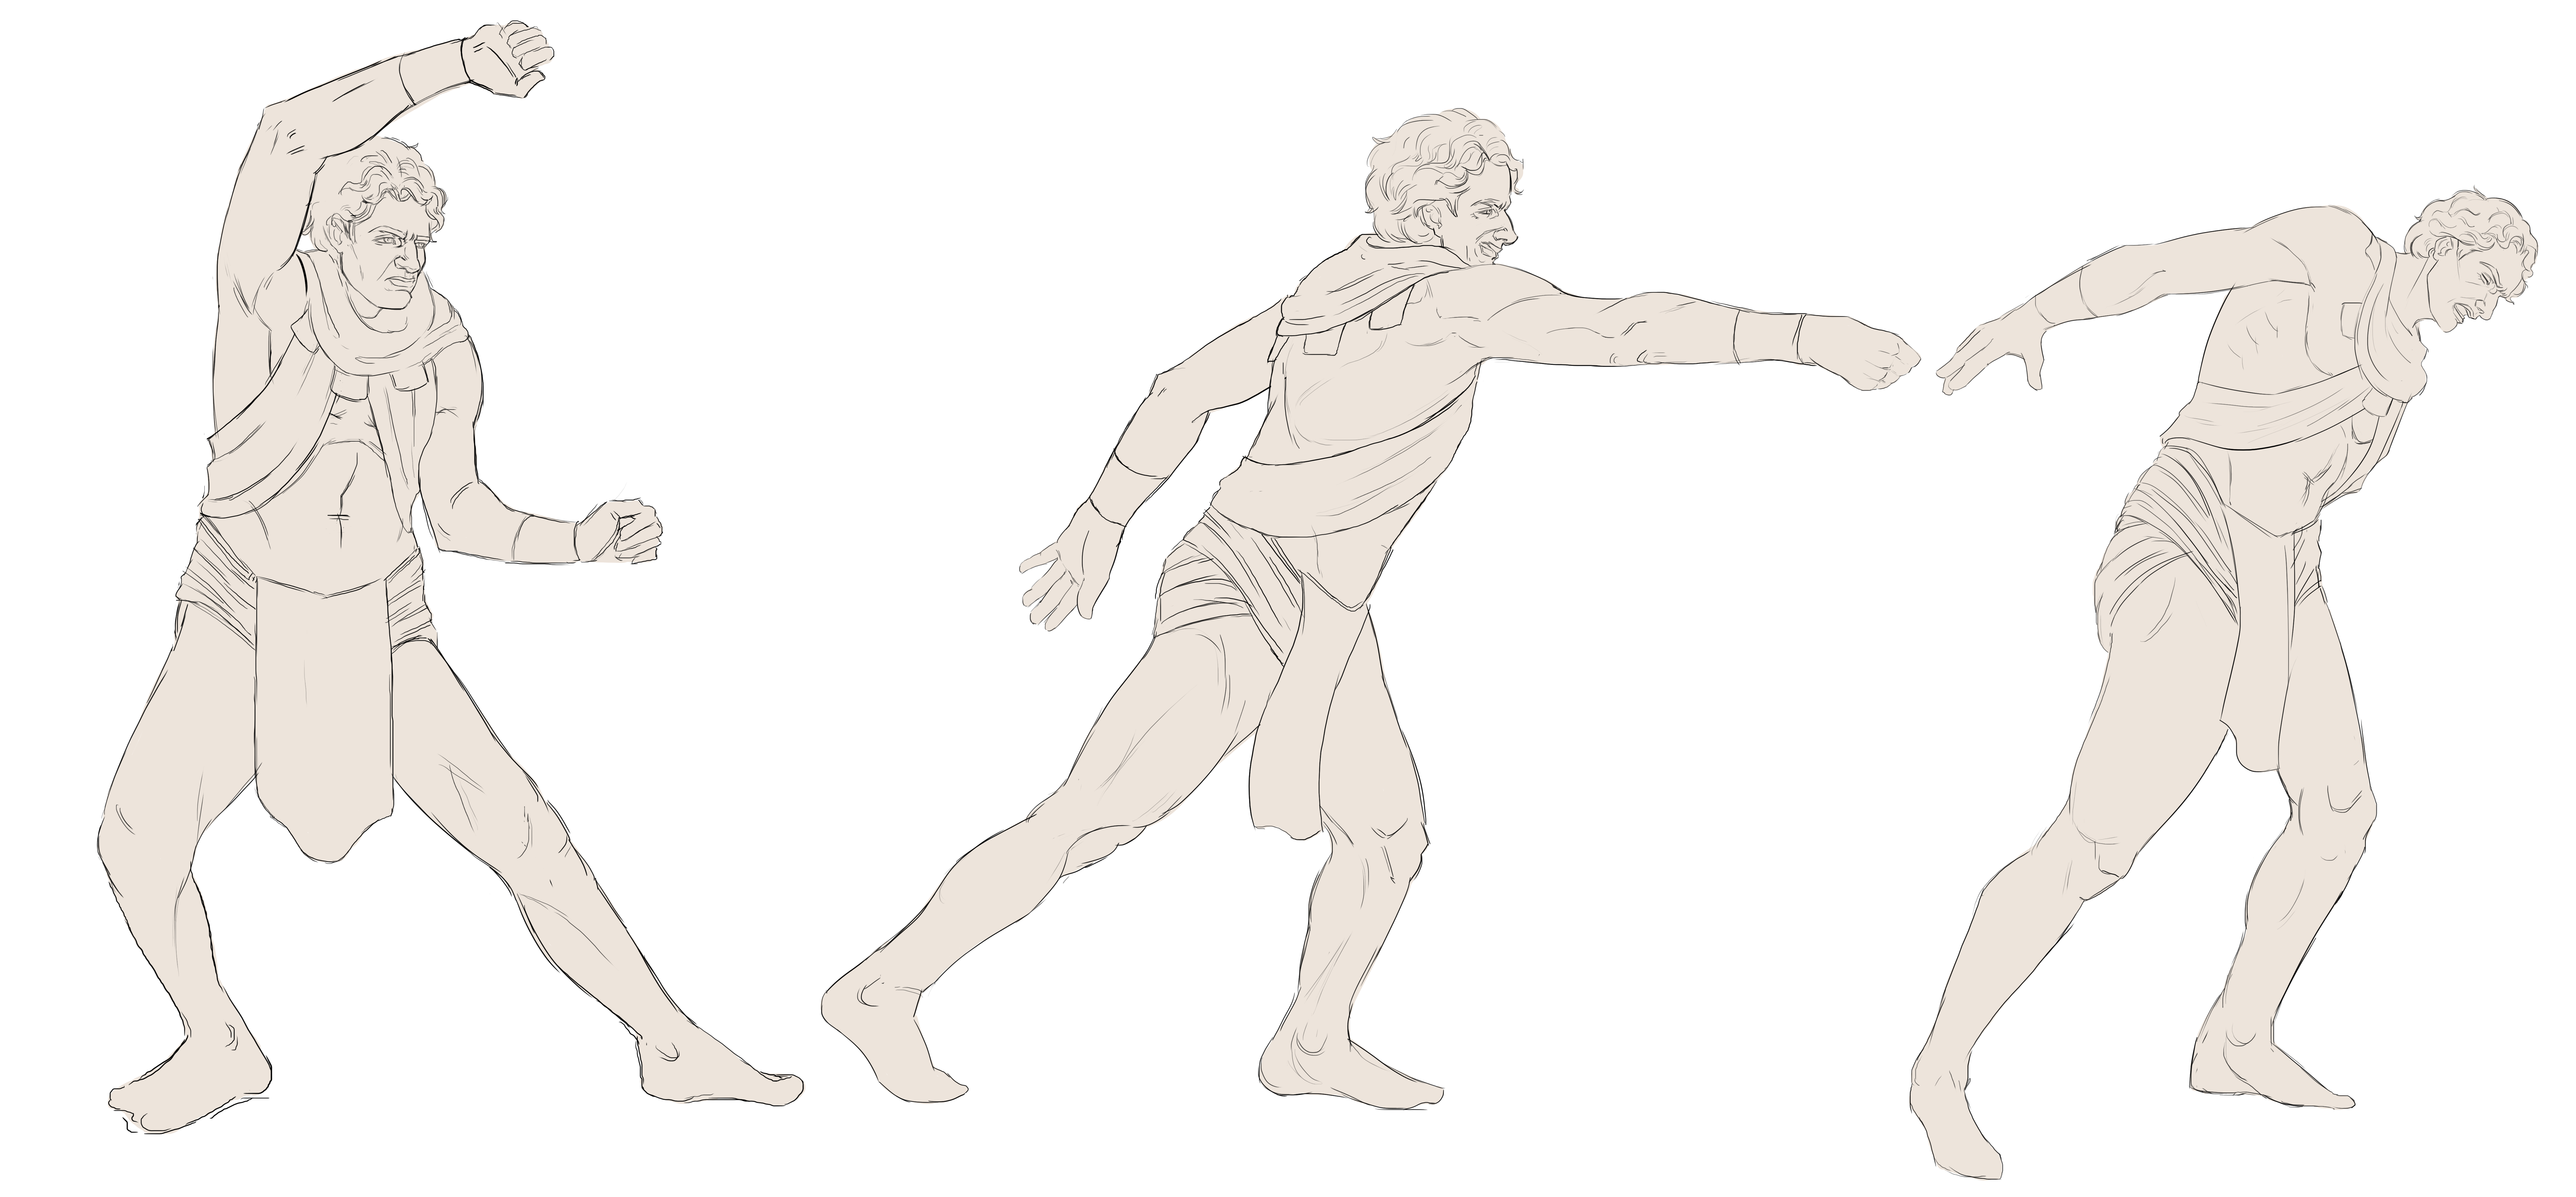 pose reference sketch